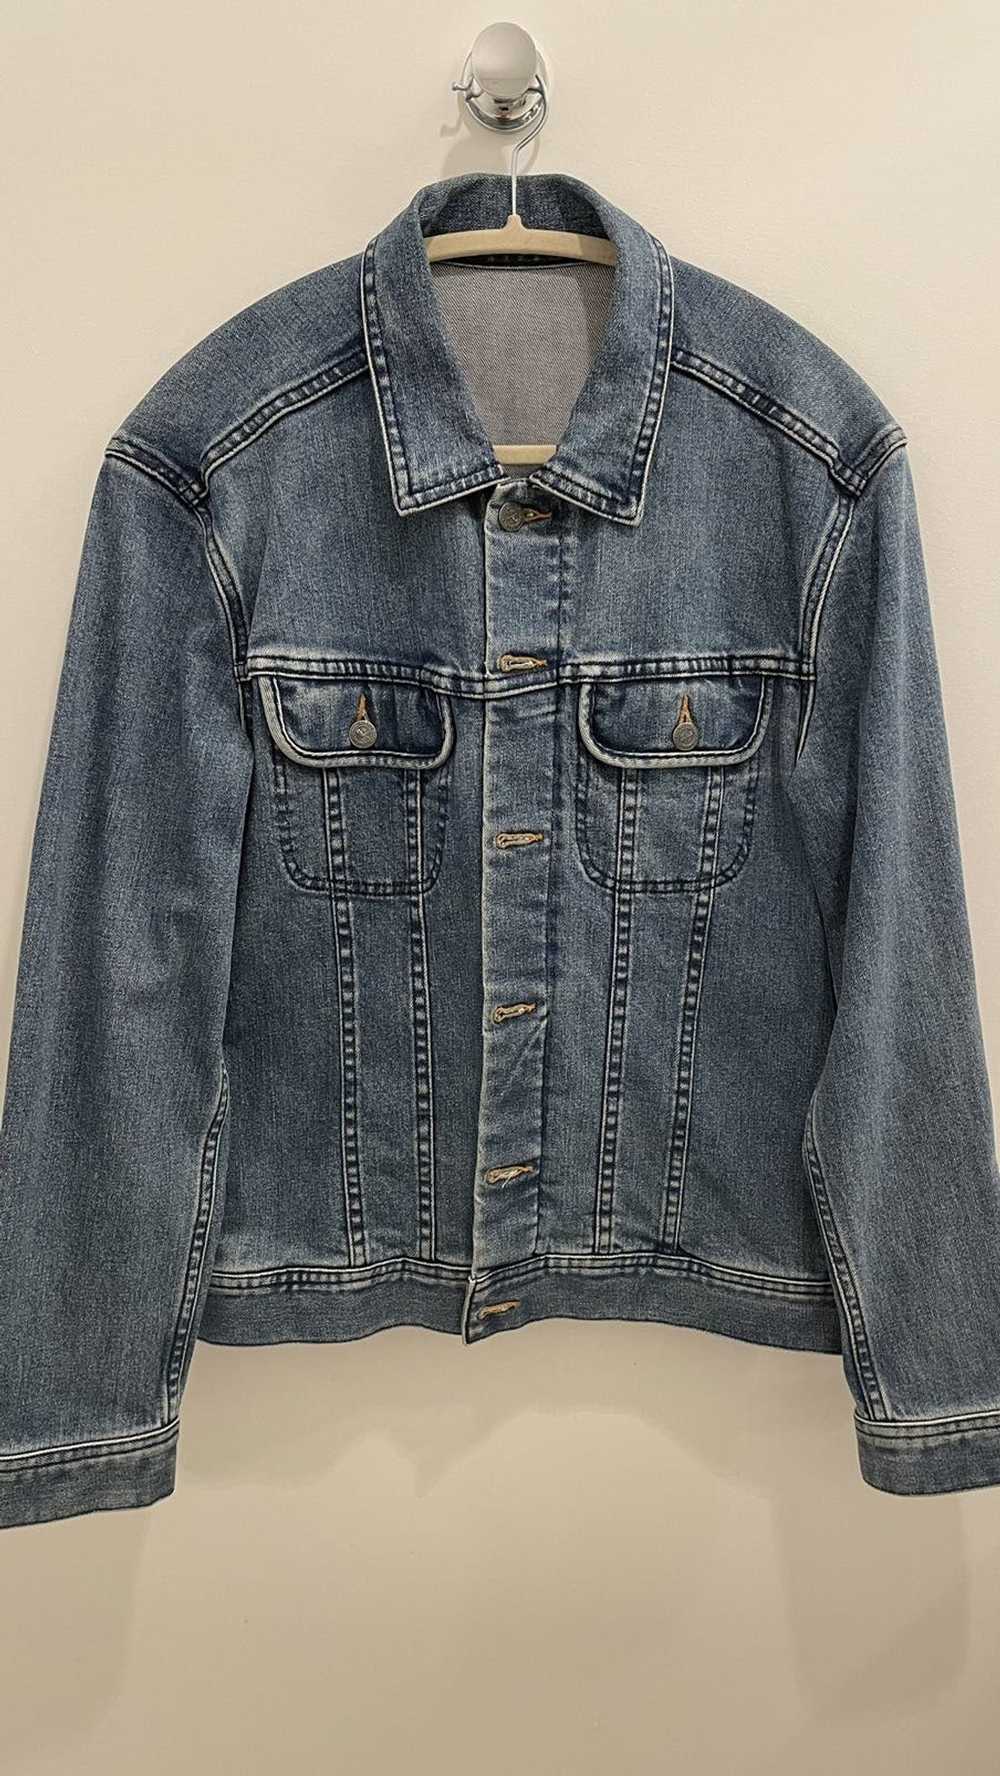 A.P.C. A.P.C. Fitted Denim Jacket - image 2